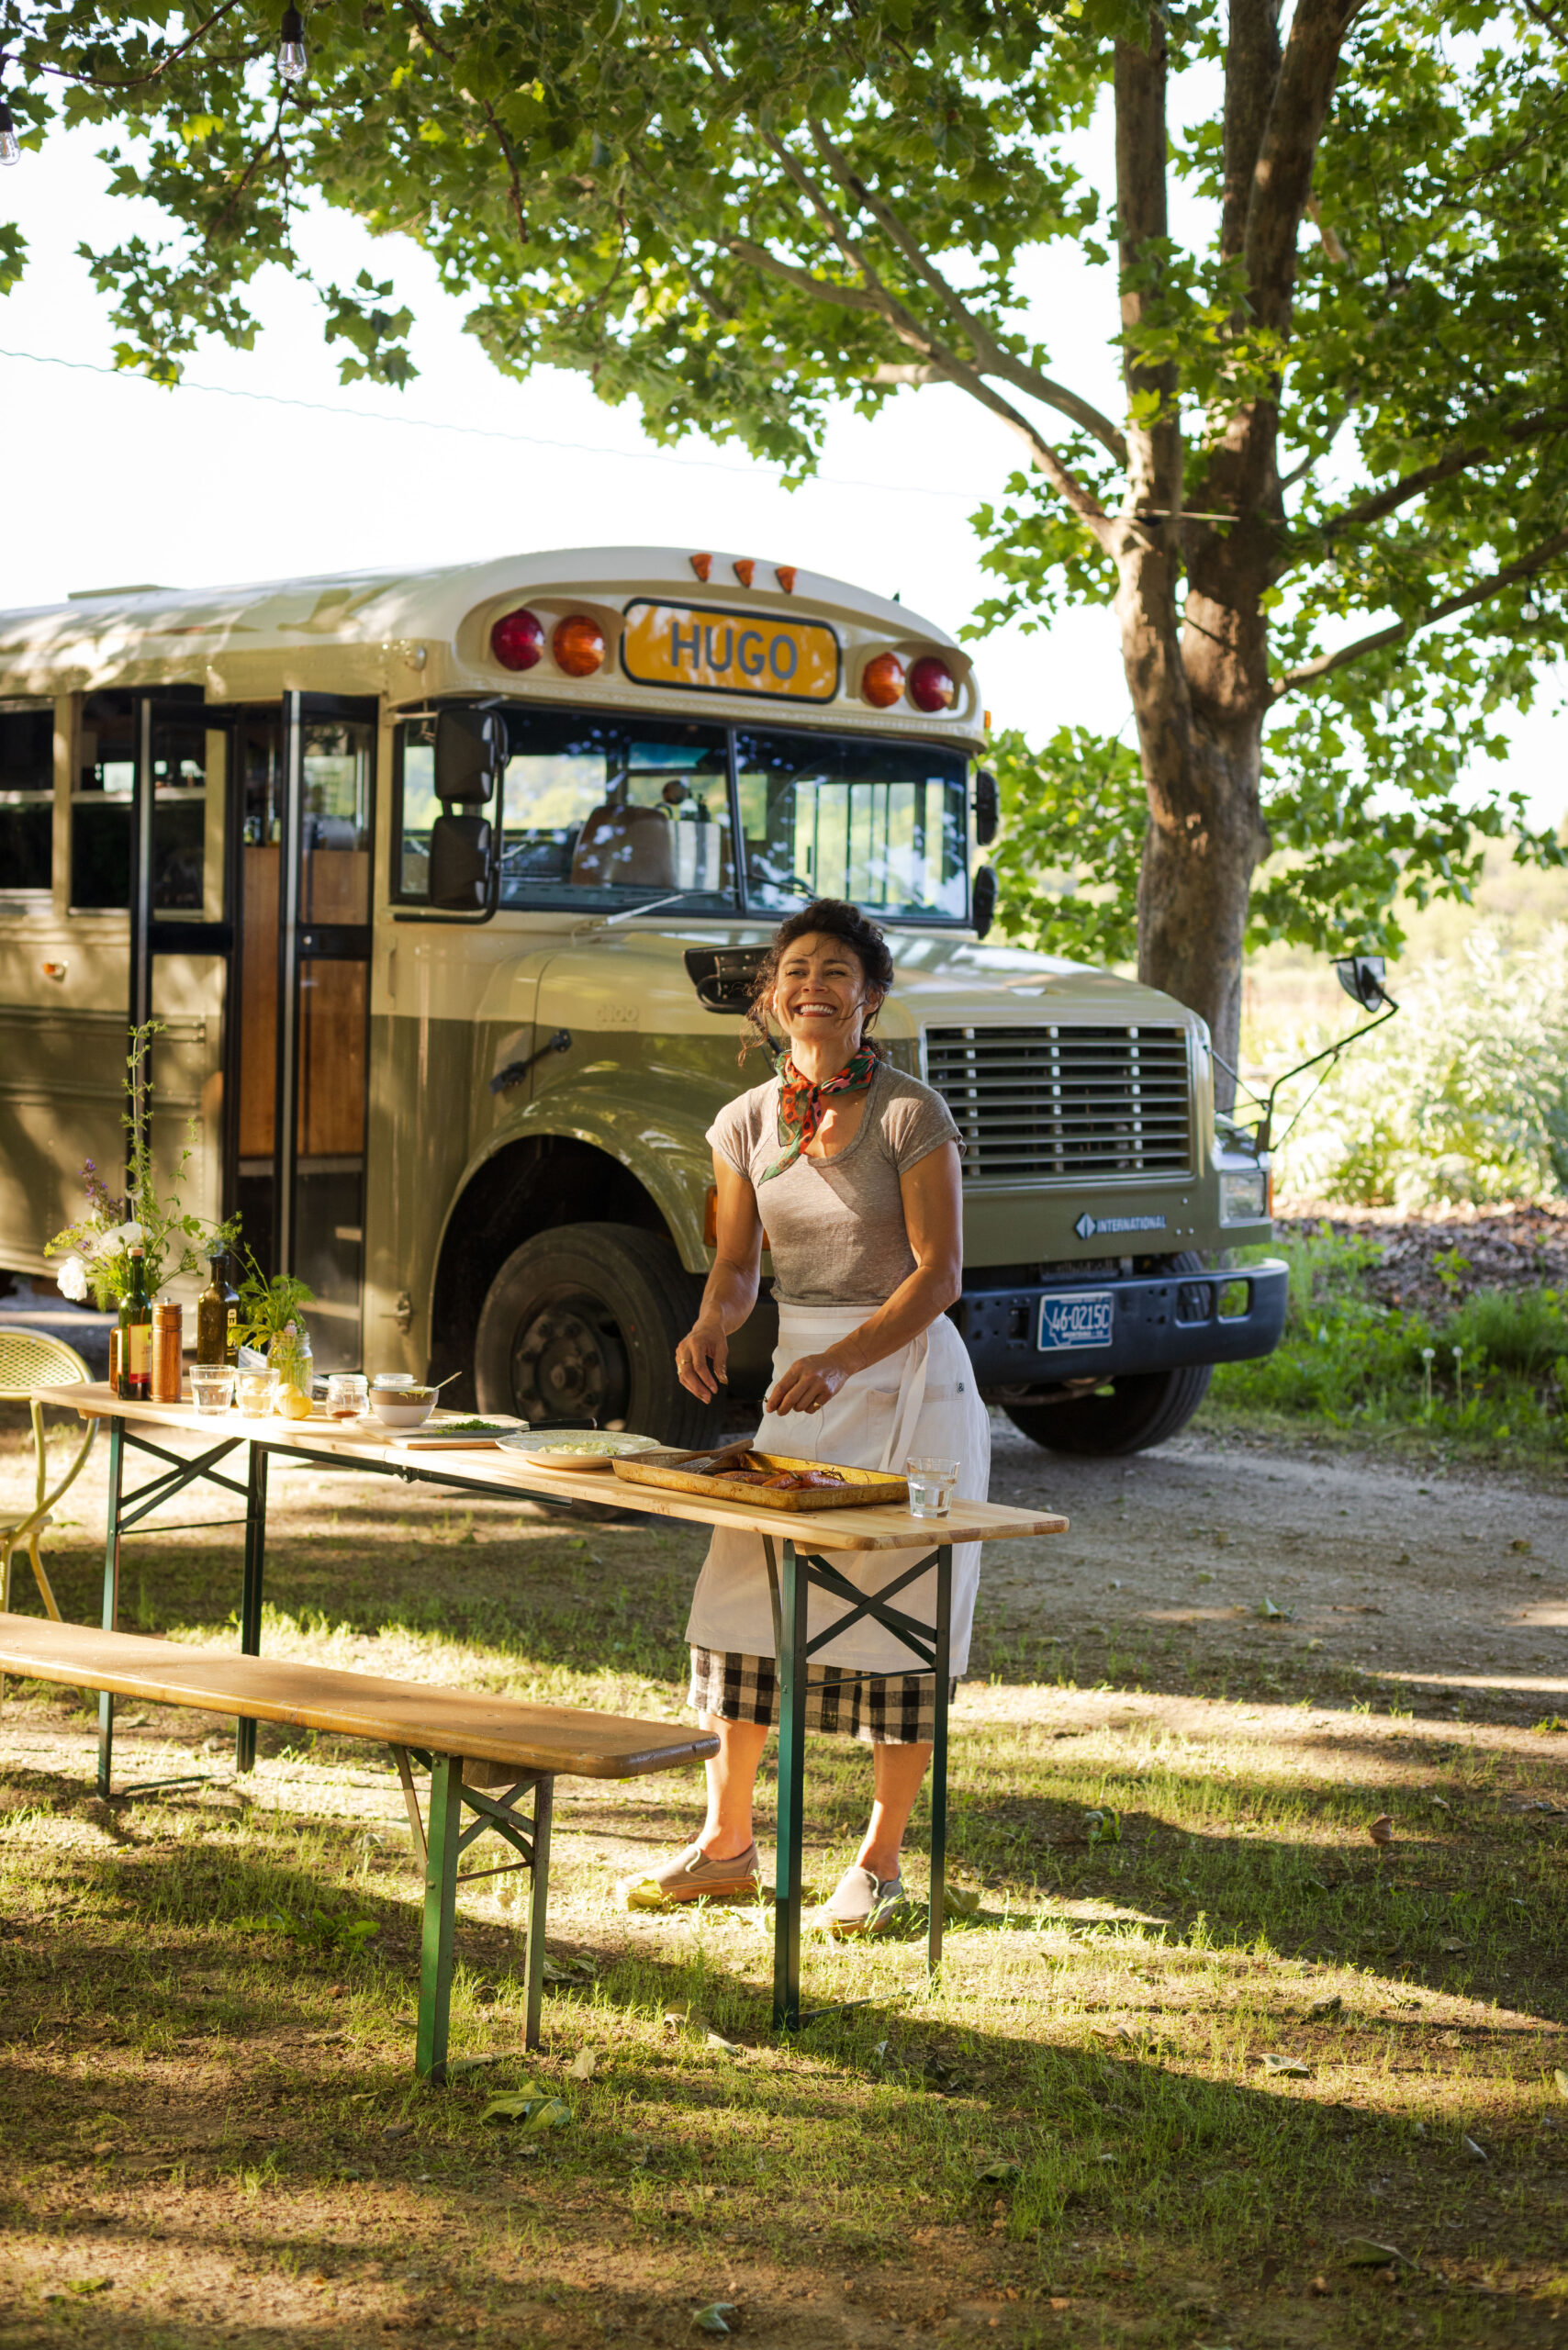 Hugo is the the nickname for the vintage school bus that chef Naomi McLeod uses for her farm-to-table chef events. (Conor Hagen)